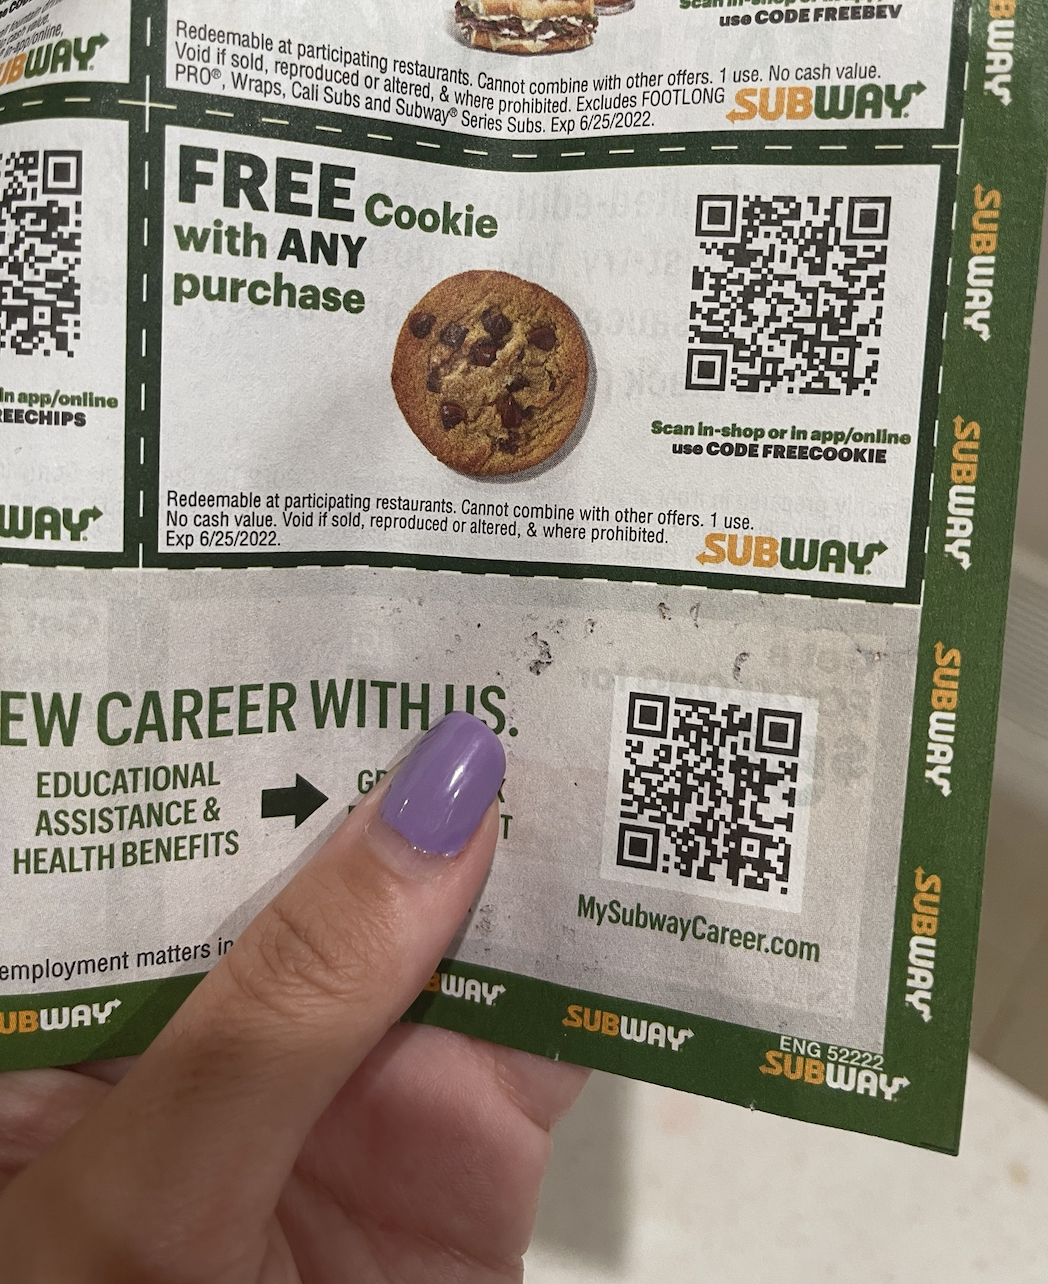 a free cookie coupon